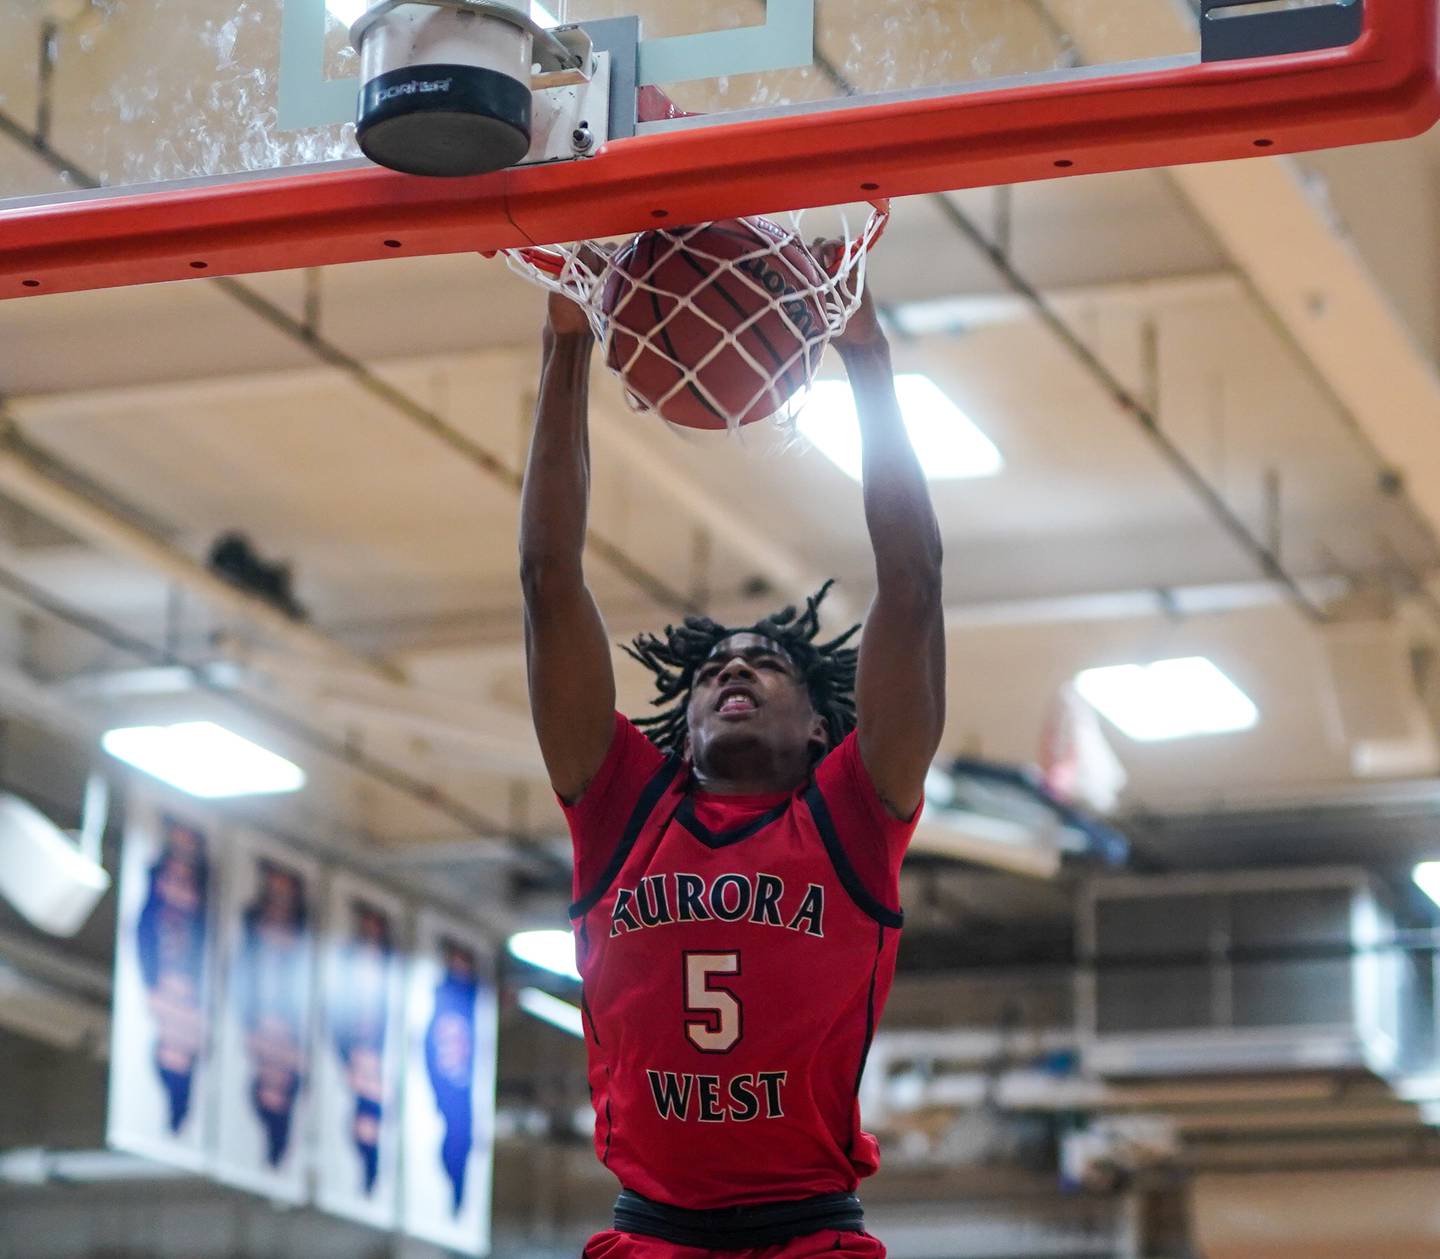 West Aurora's Terrence Smith (5) dunks the ball against Oswego during a basketball game at Oswego High School on Friday, Dec 1, 2023.